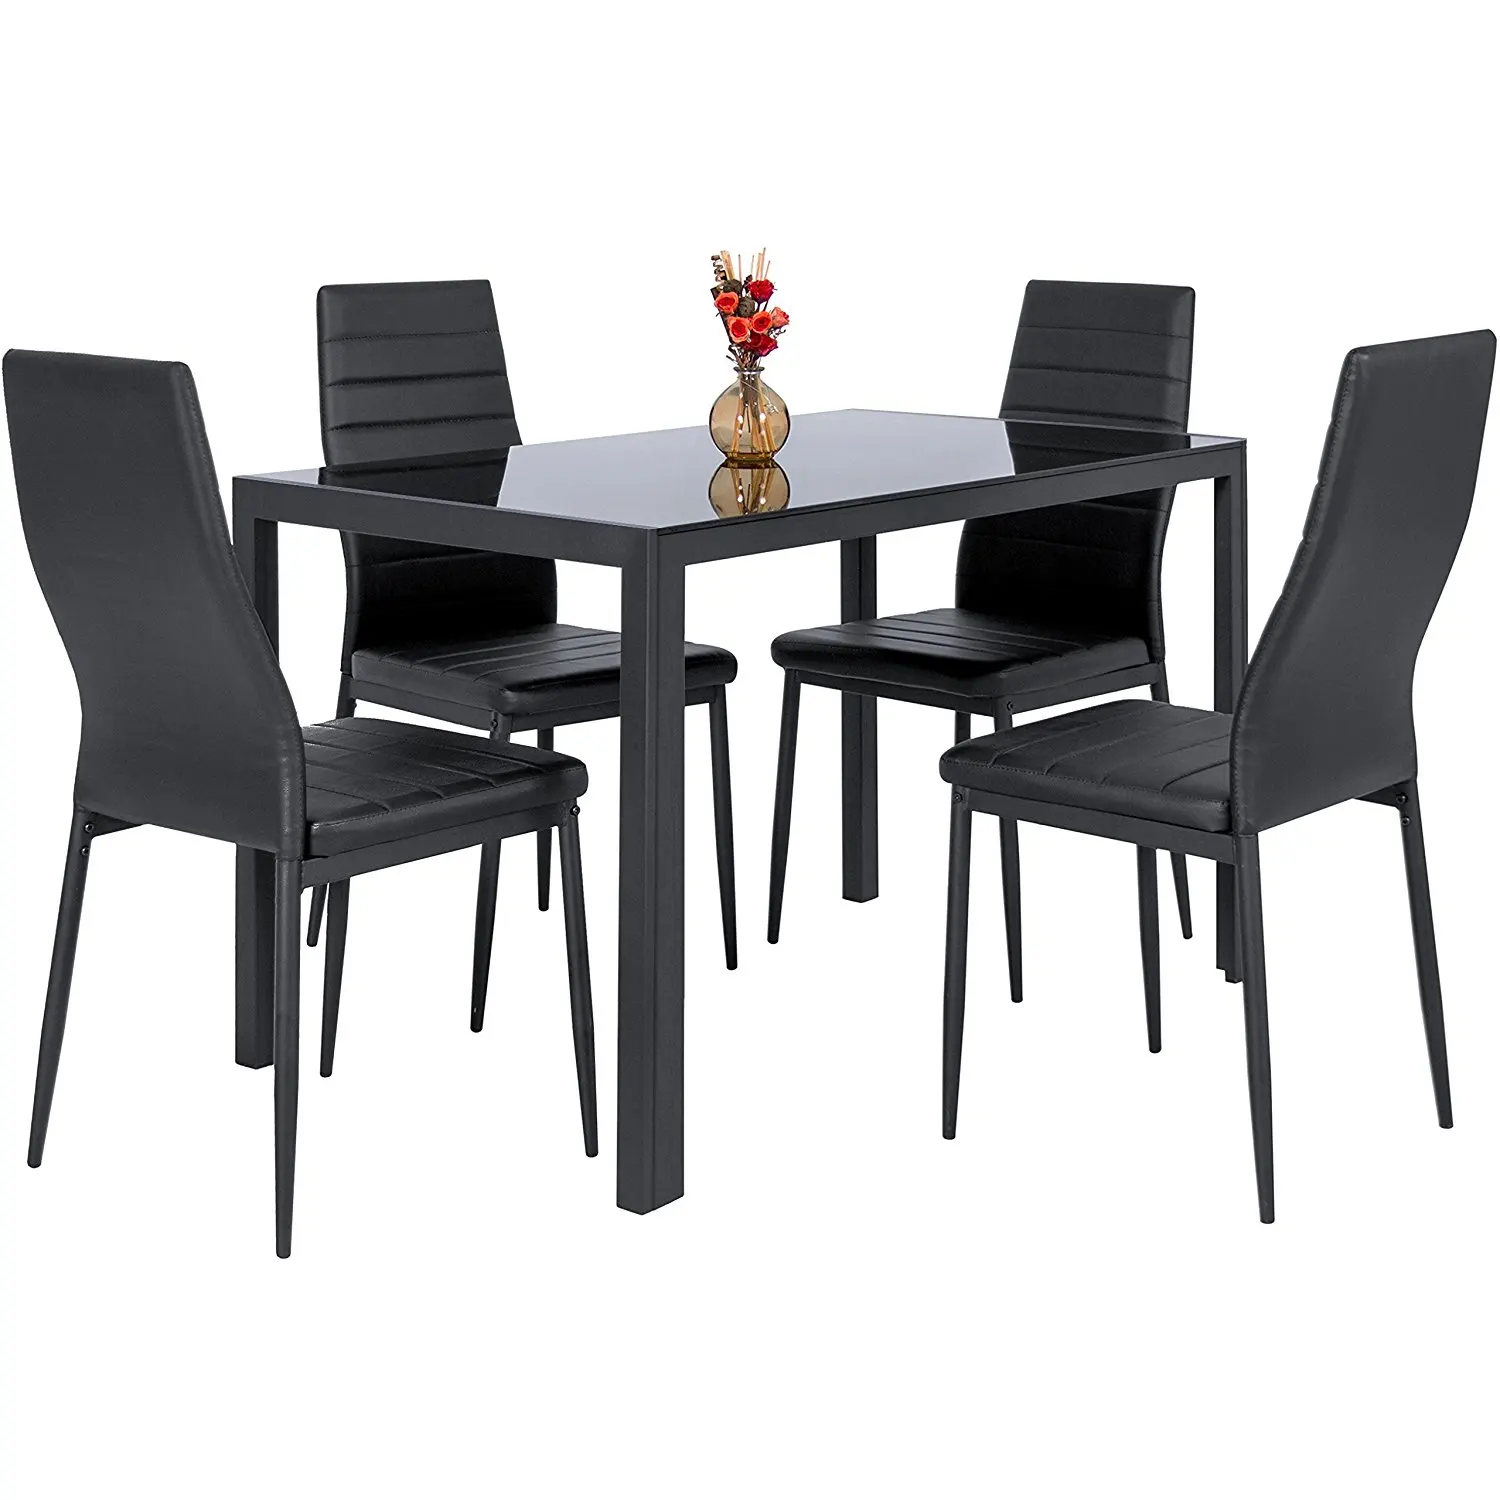 Wholesale 8 10 Seater Dining Room Table Modern Buy Dining Room Table